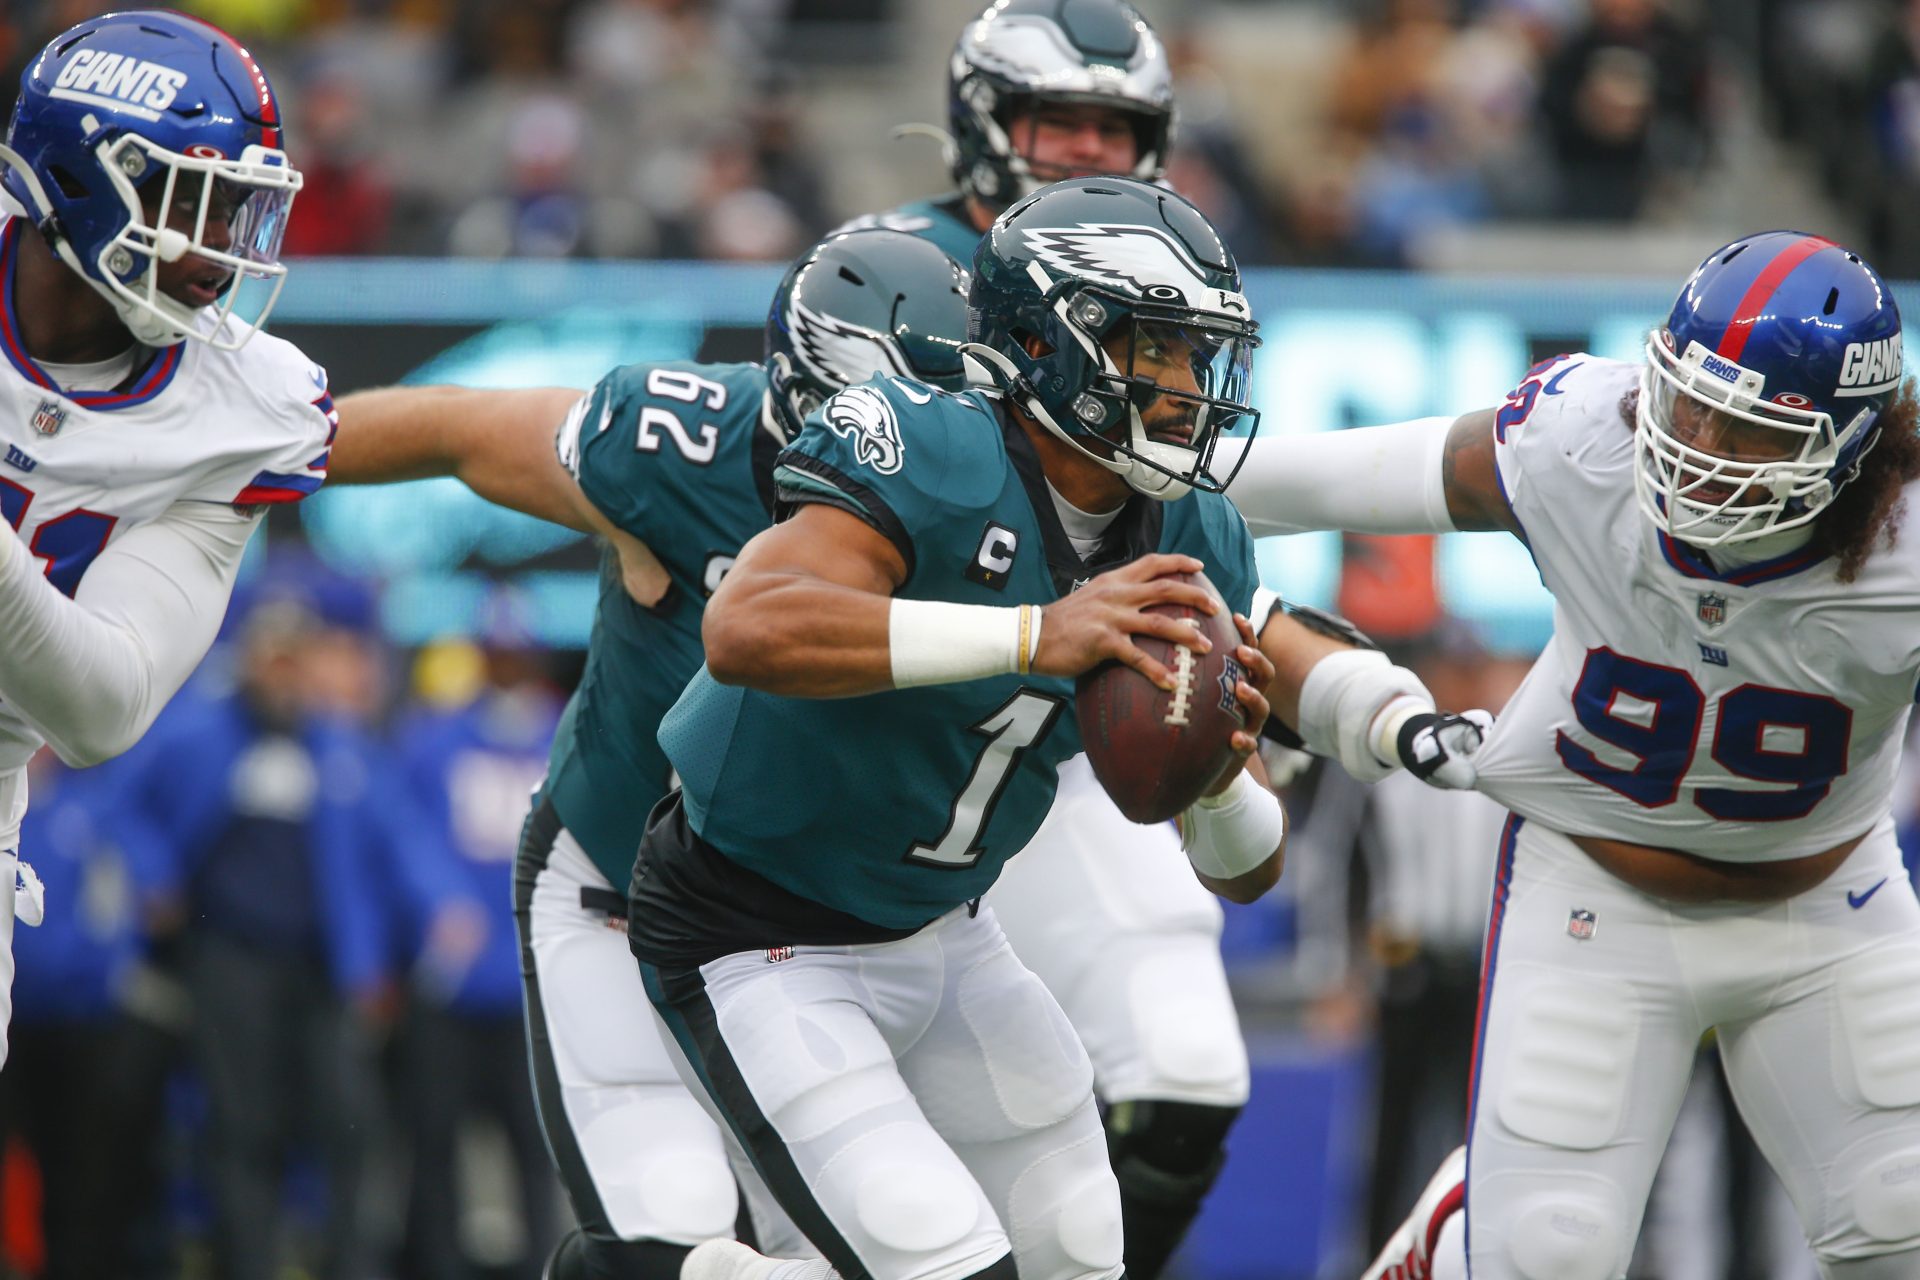 Philadelphia Eagles quarterback Jalen Hurts runs the ball during the first half of an NFL football game against the New York Giants, Sunday, Nov. 28, 2021, in East Rutherford, N.J.